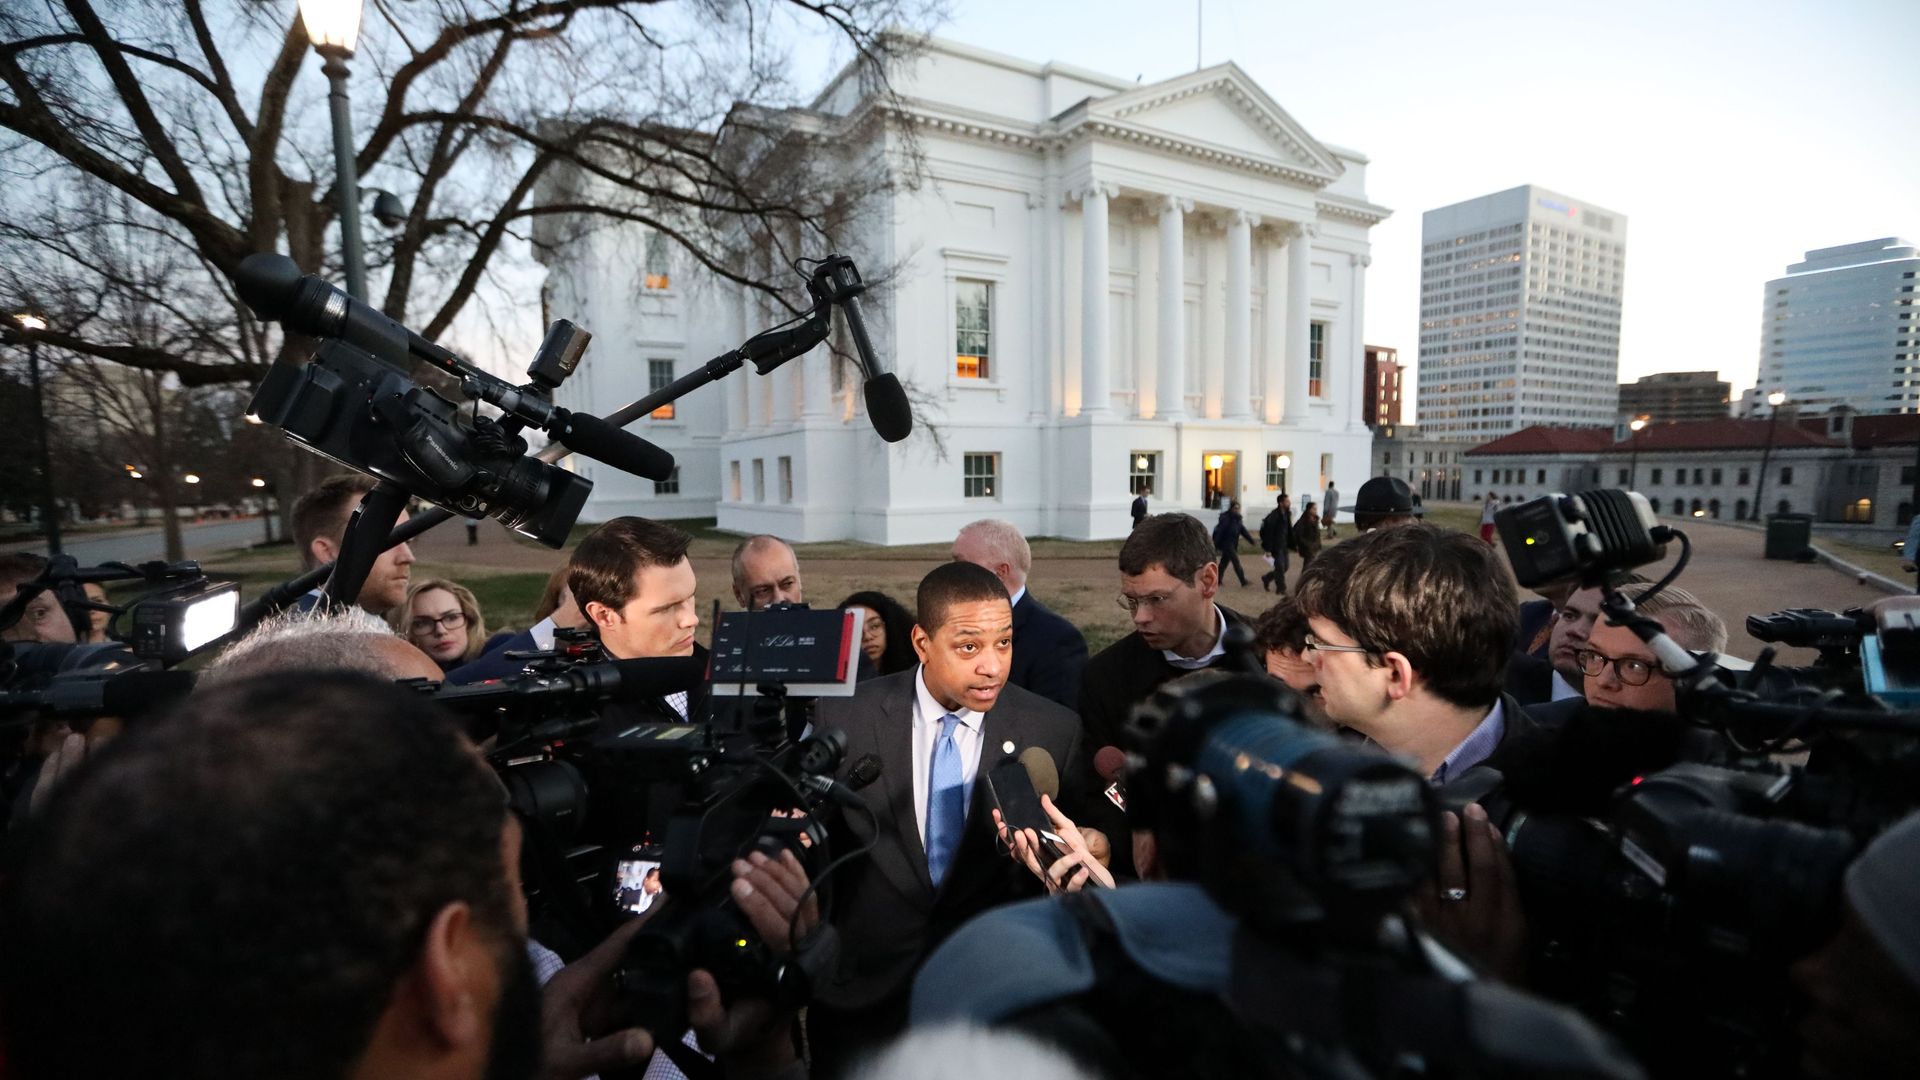 Justin Fairfax surrounded by reporters and mics.